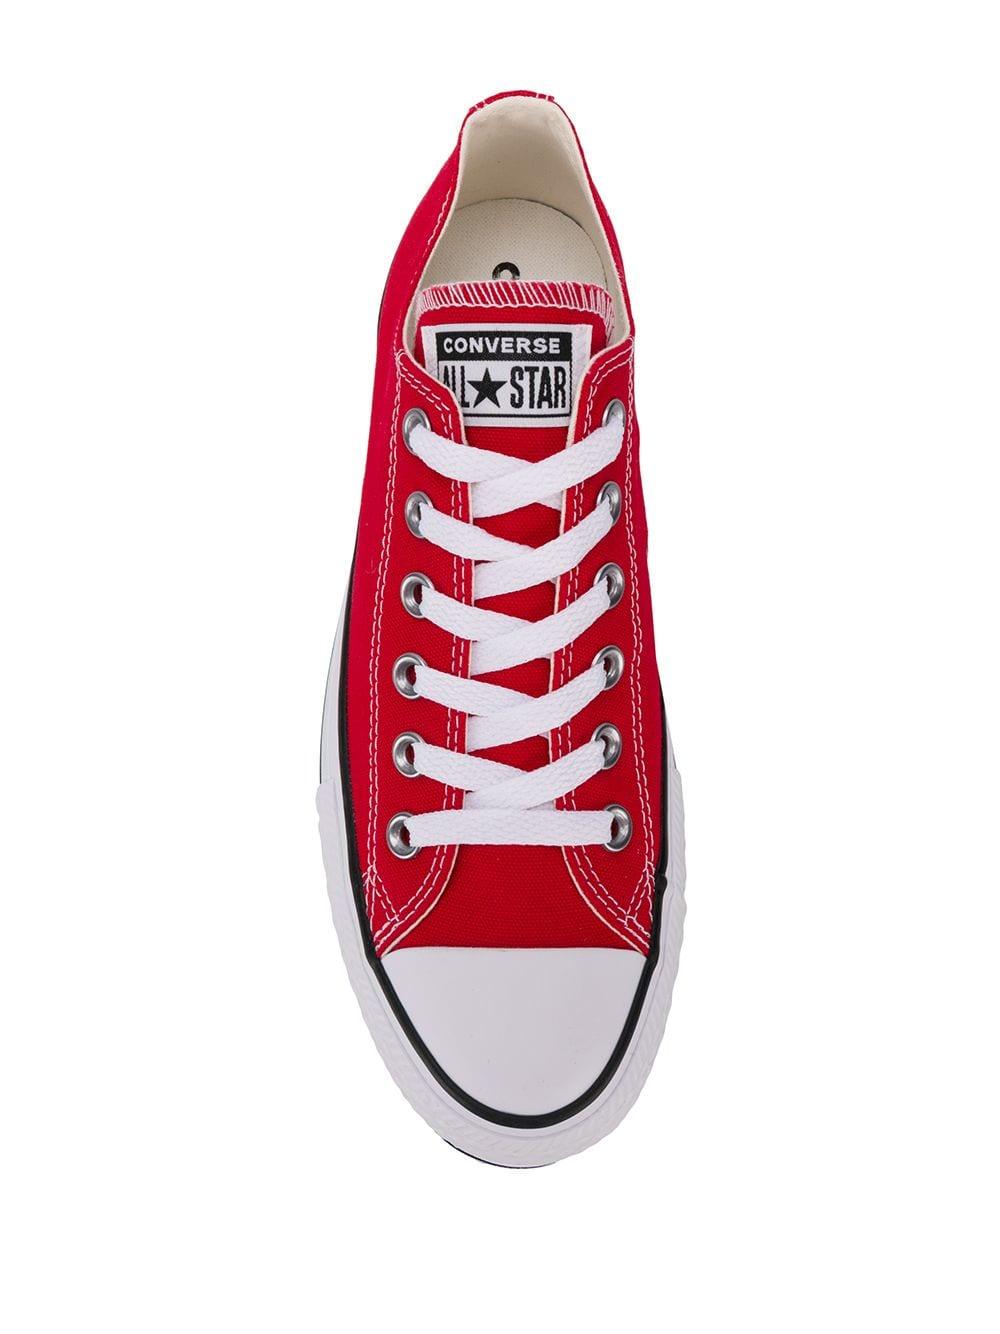 Converse Canvas Platform Sneakers in Red - Lyst